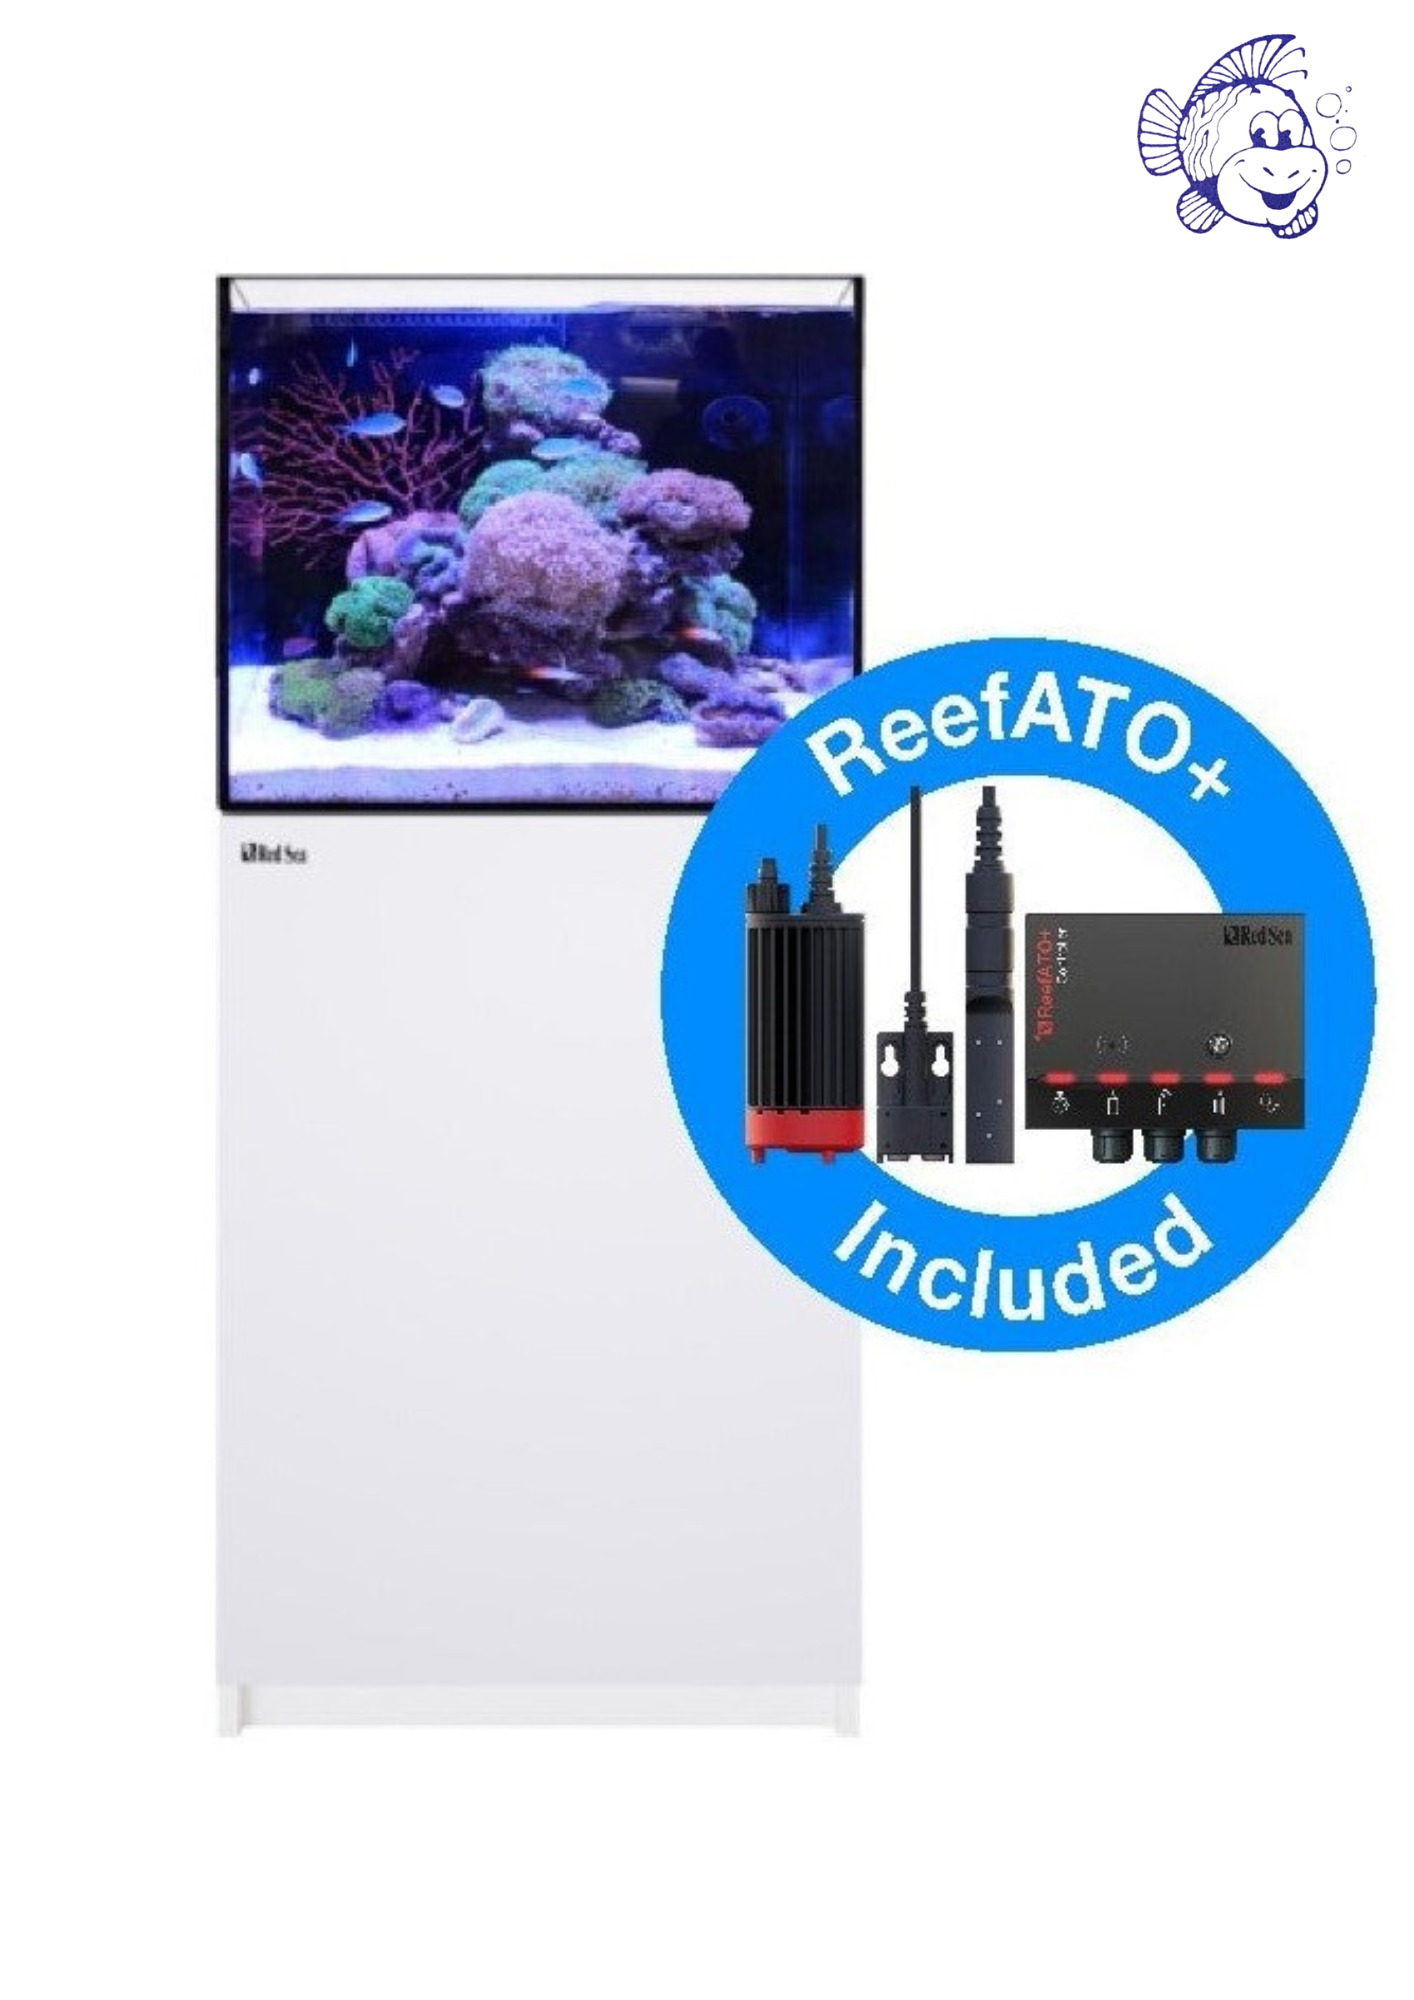 Red Sea Reefer 170 G2+ meuble blanc